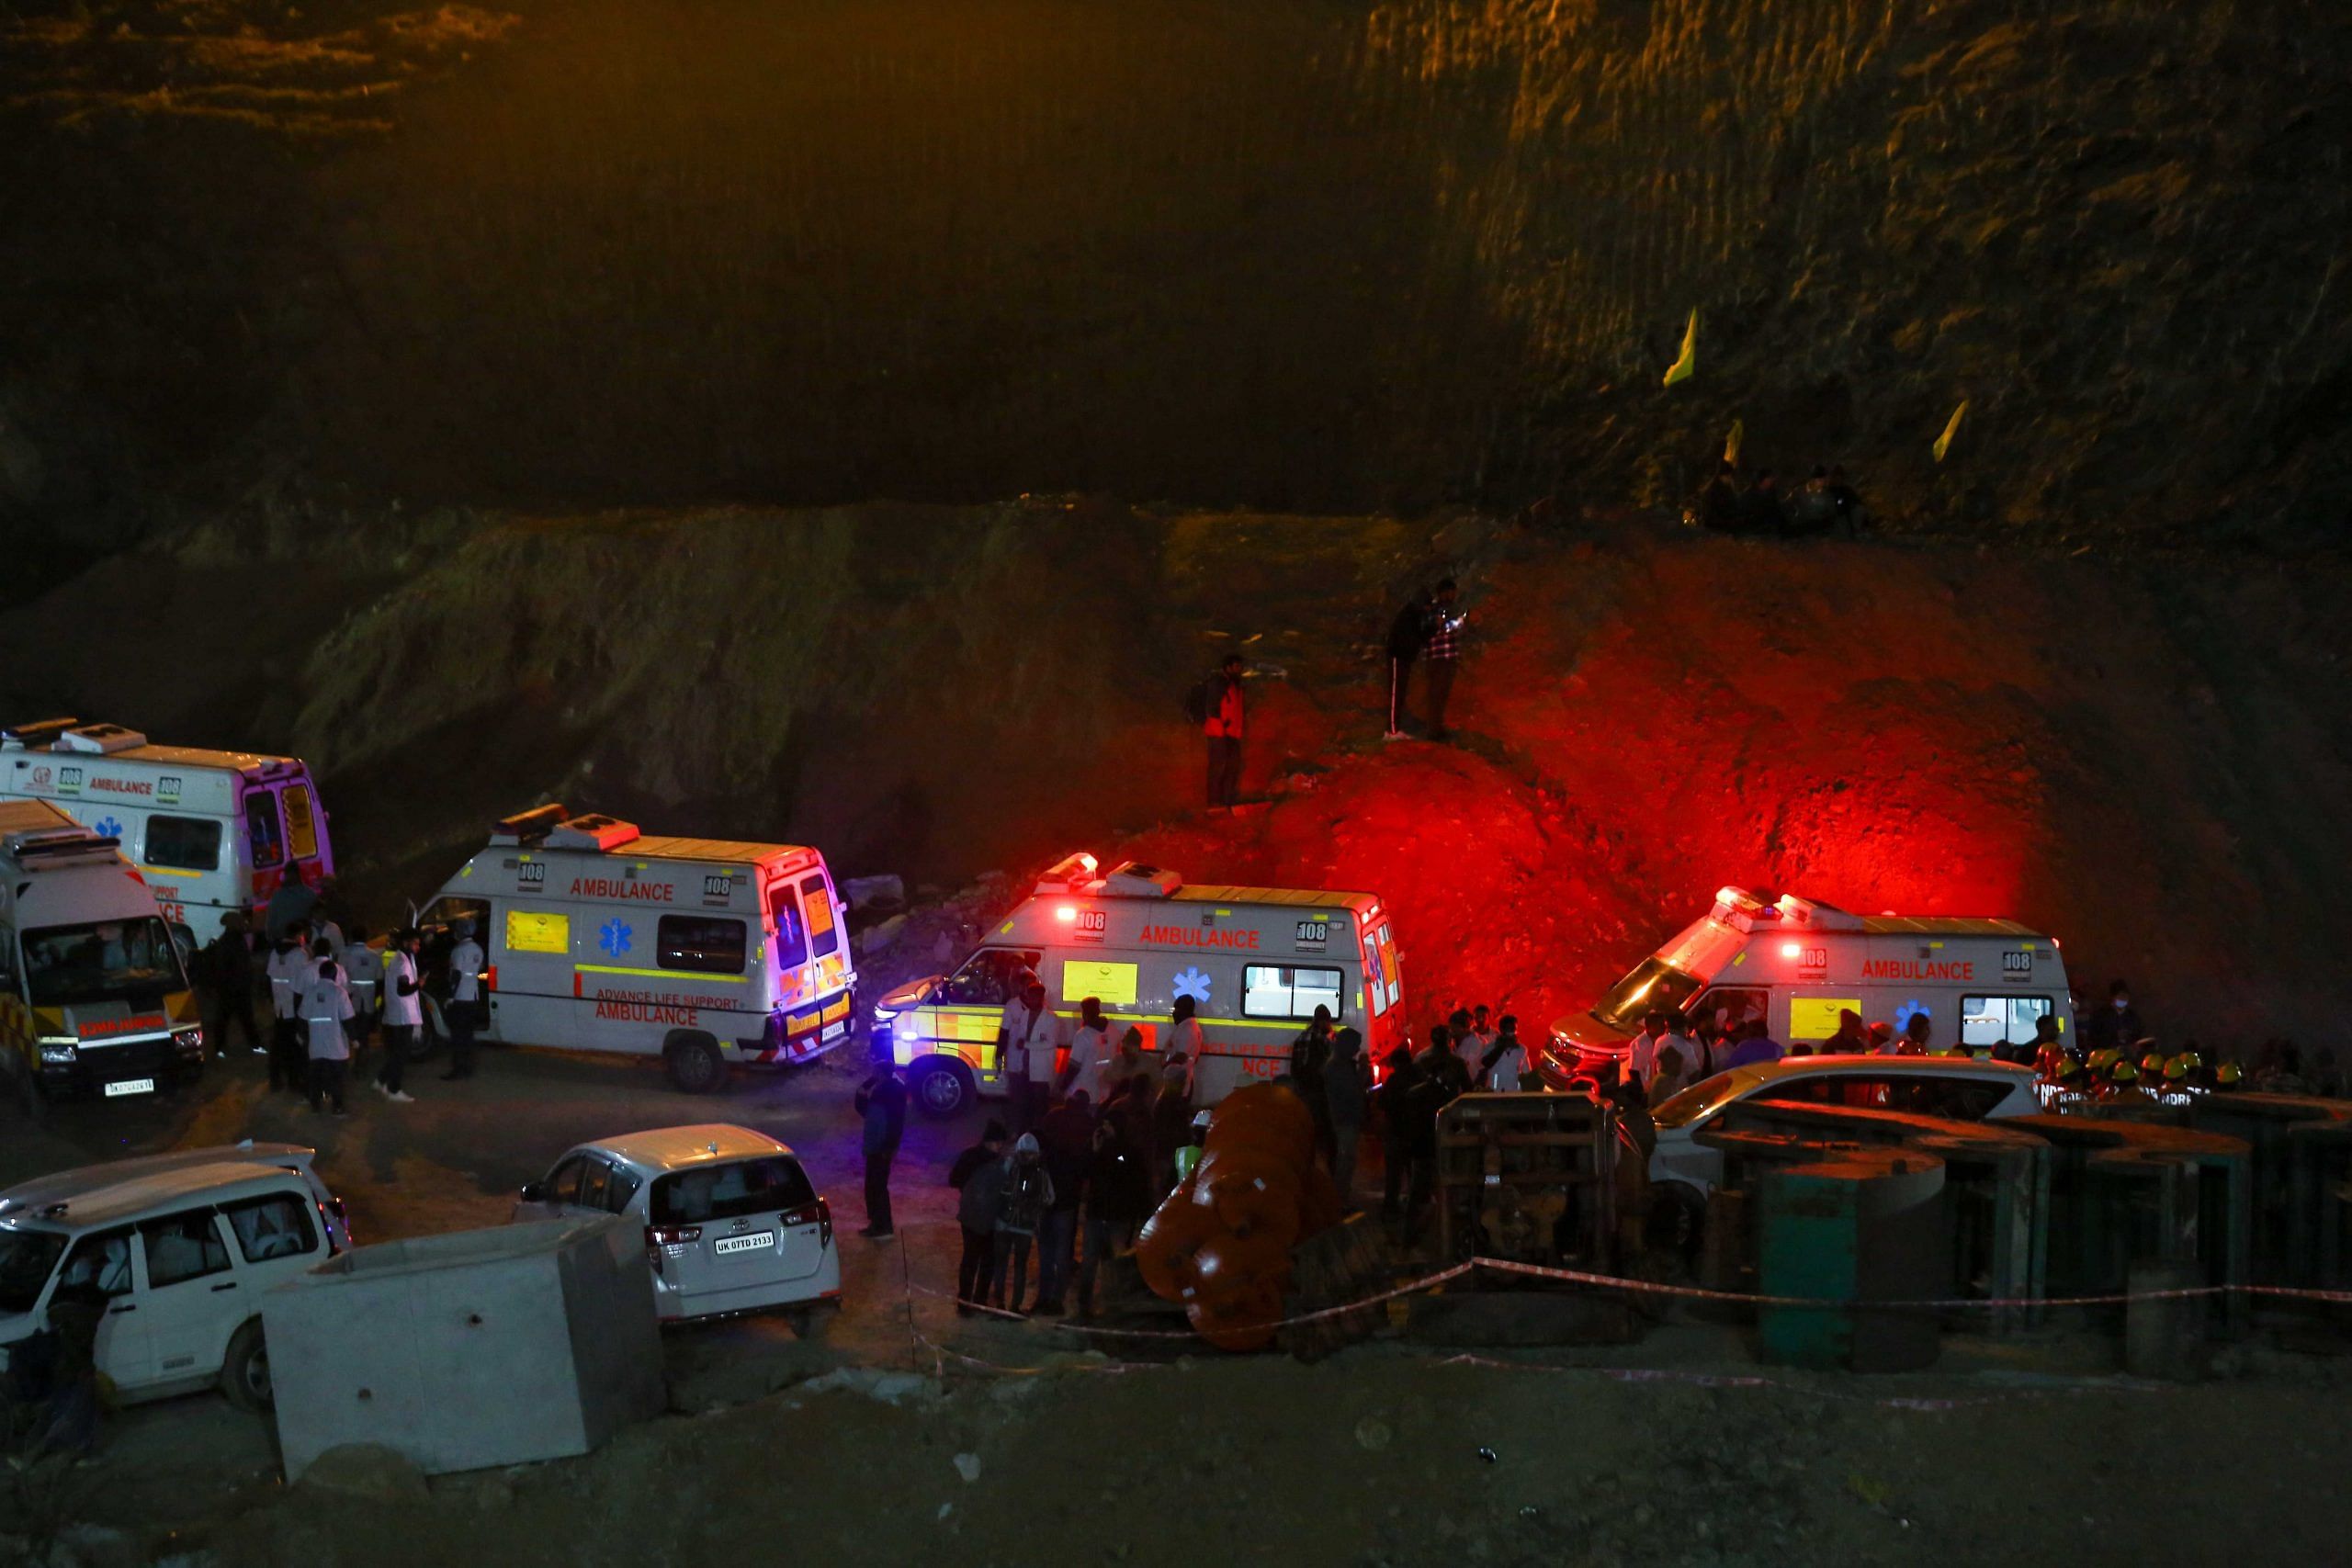 Ambulances in standy by in the entrance of the tunnel | Suraj Singh Bisht | ThePrint